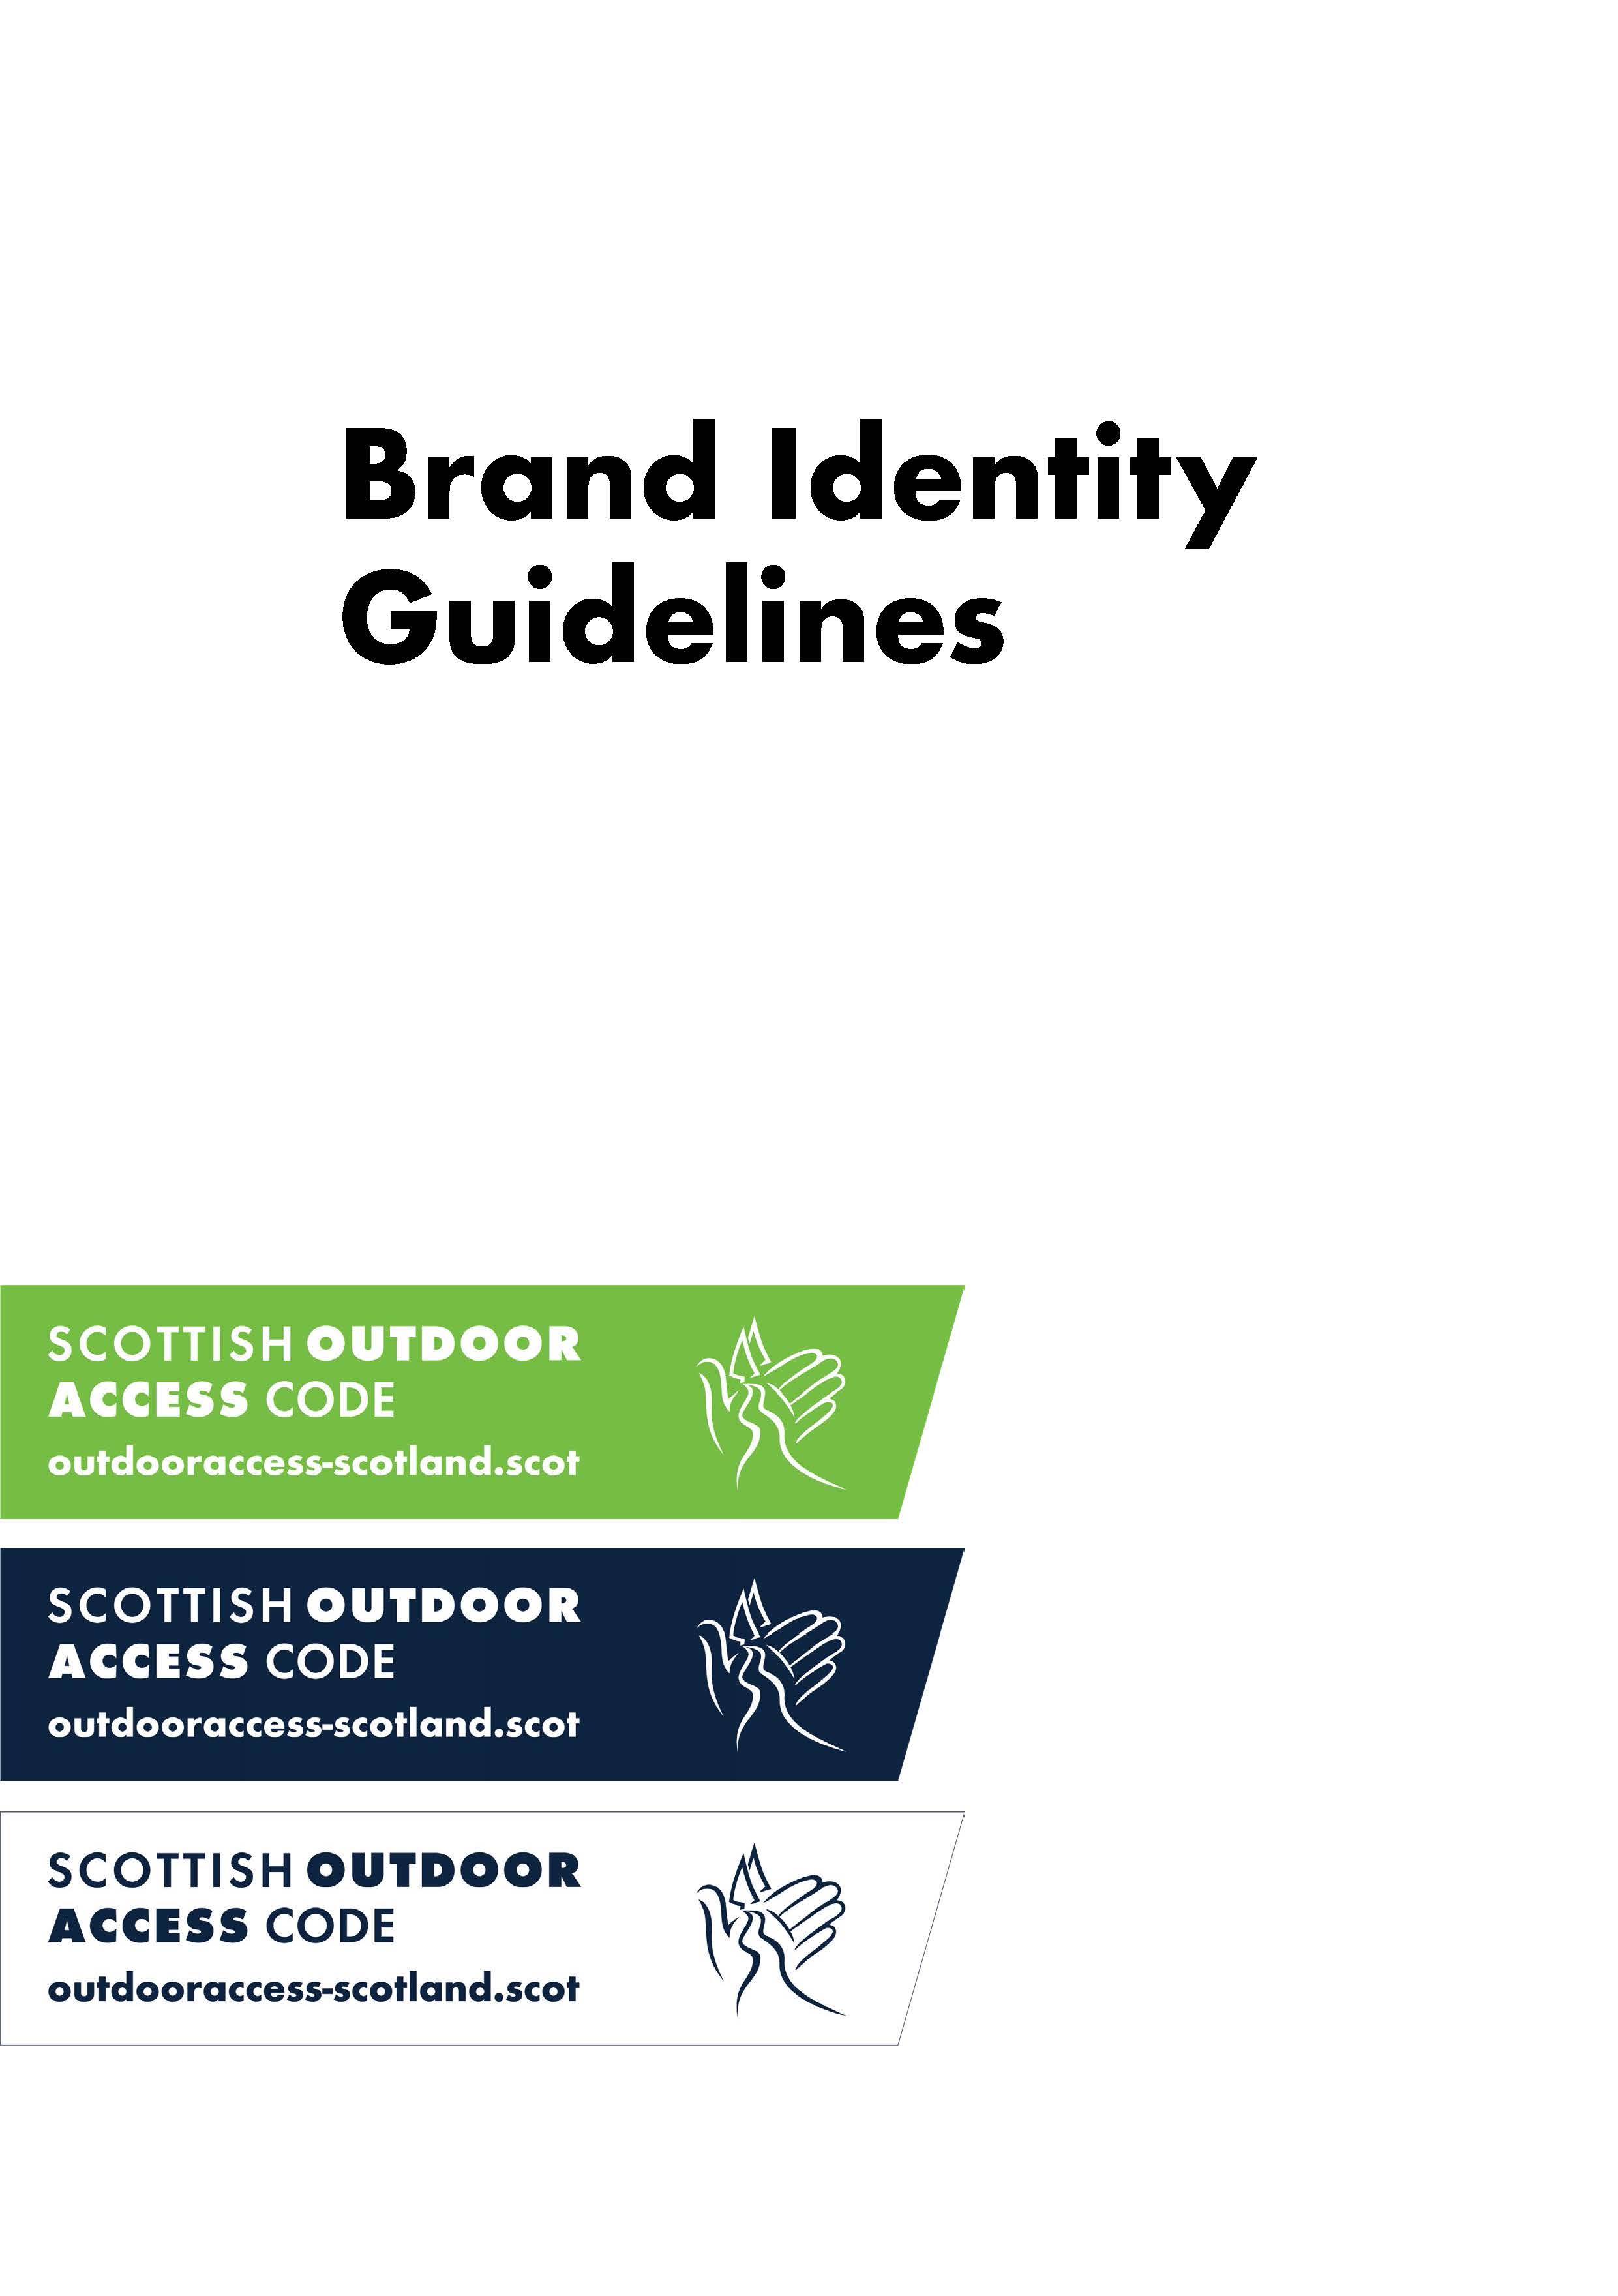 SOAC brand guidelines front cover